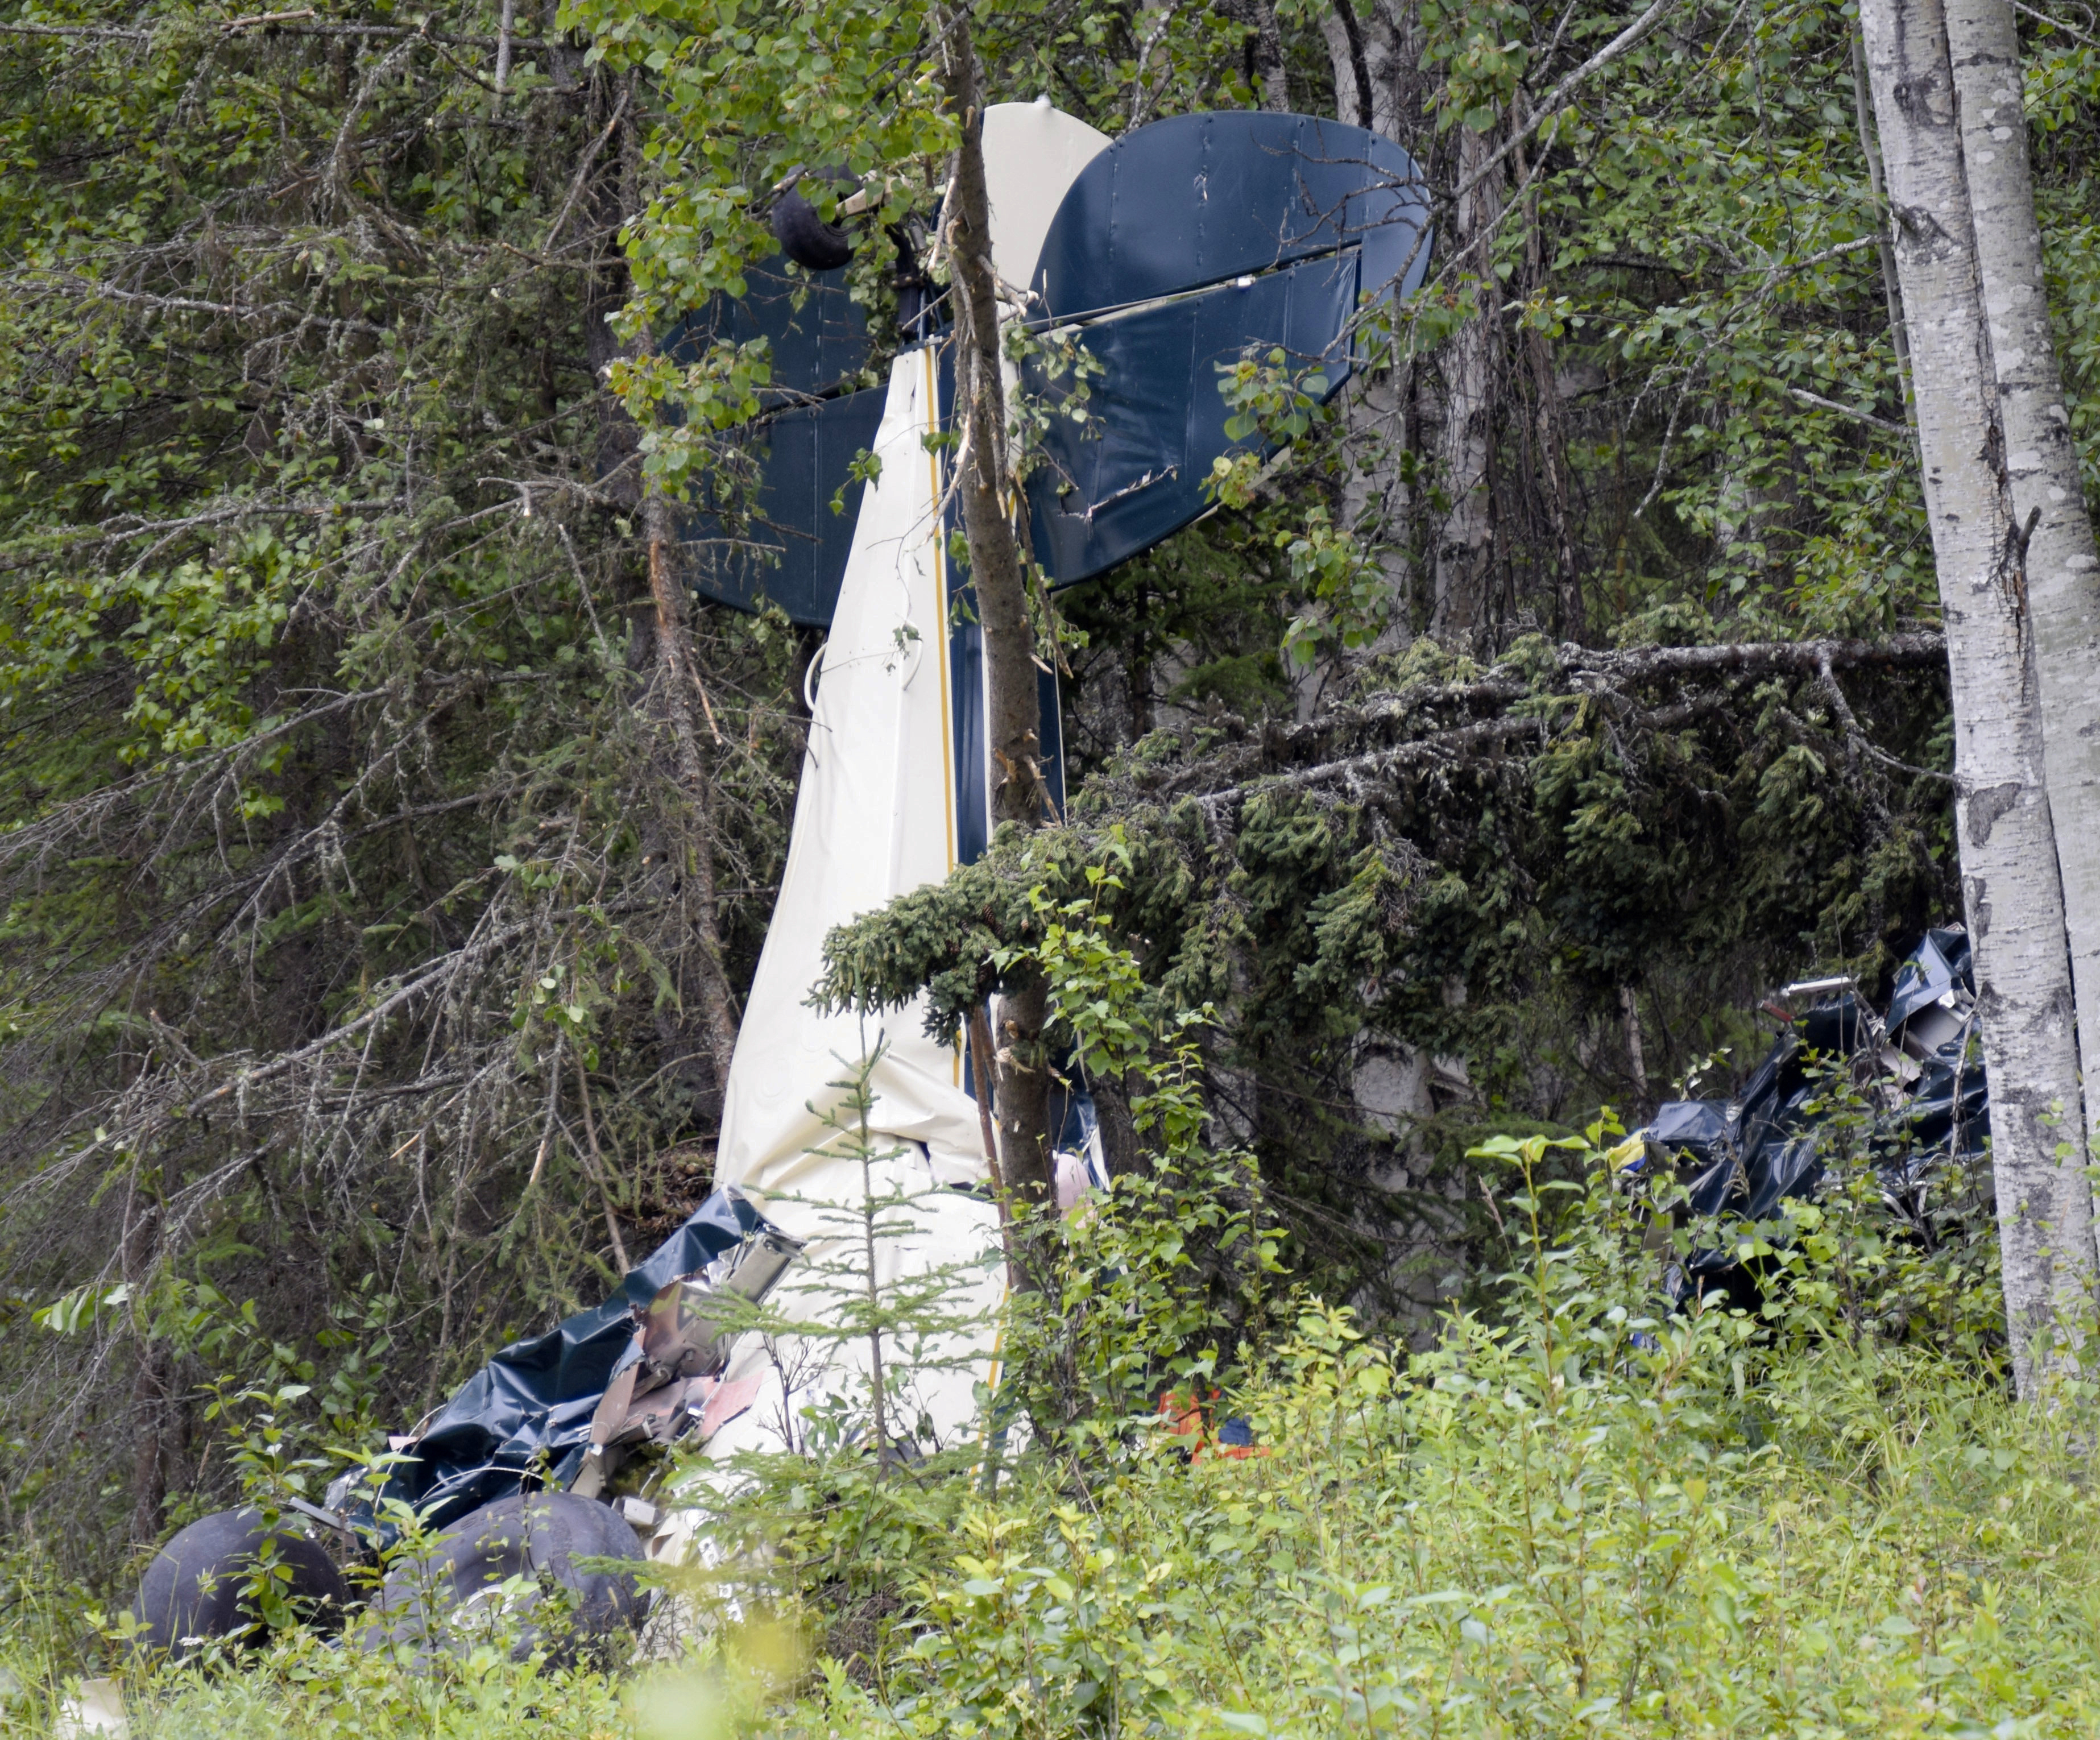 A plane rests in brush and trees after a midair collision outside of Soldotna, Alaska, on Friday, July 31, 2020. (Jeff Helminiak/Peninsula Clarion —AP)